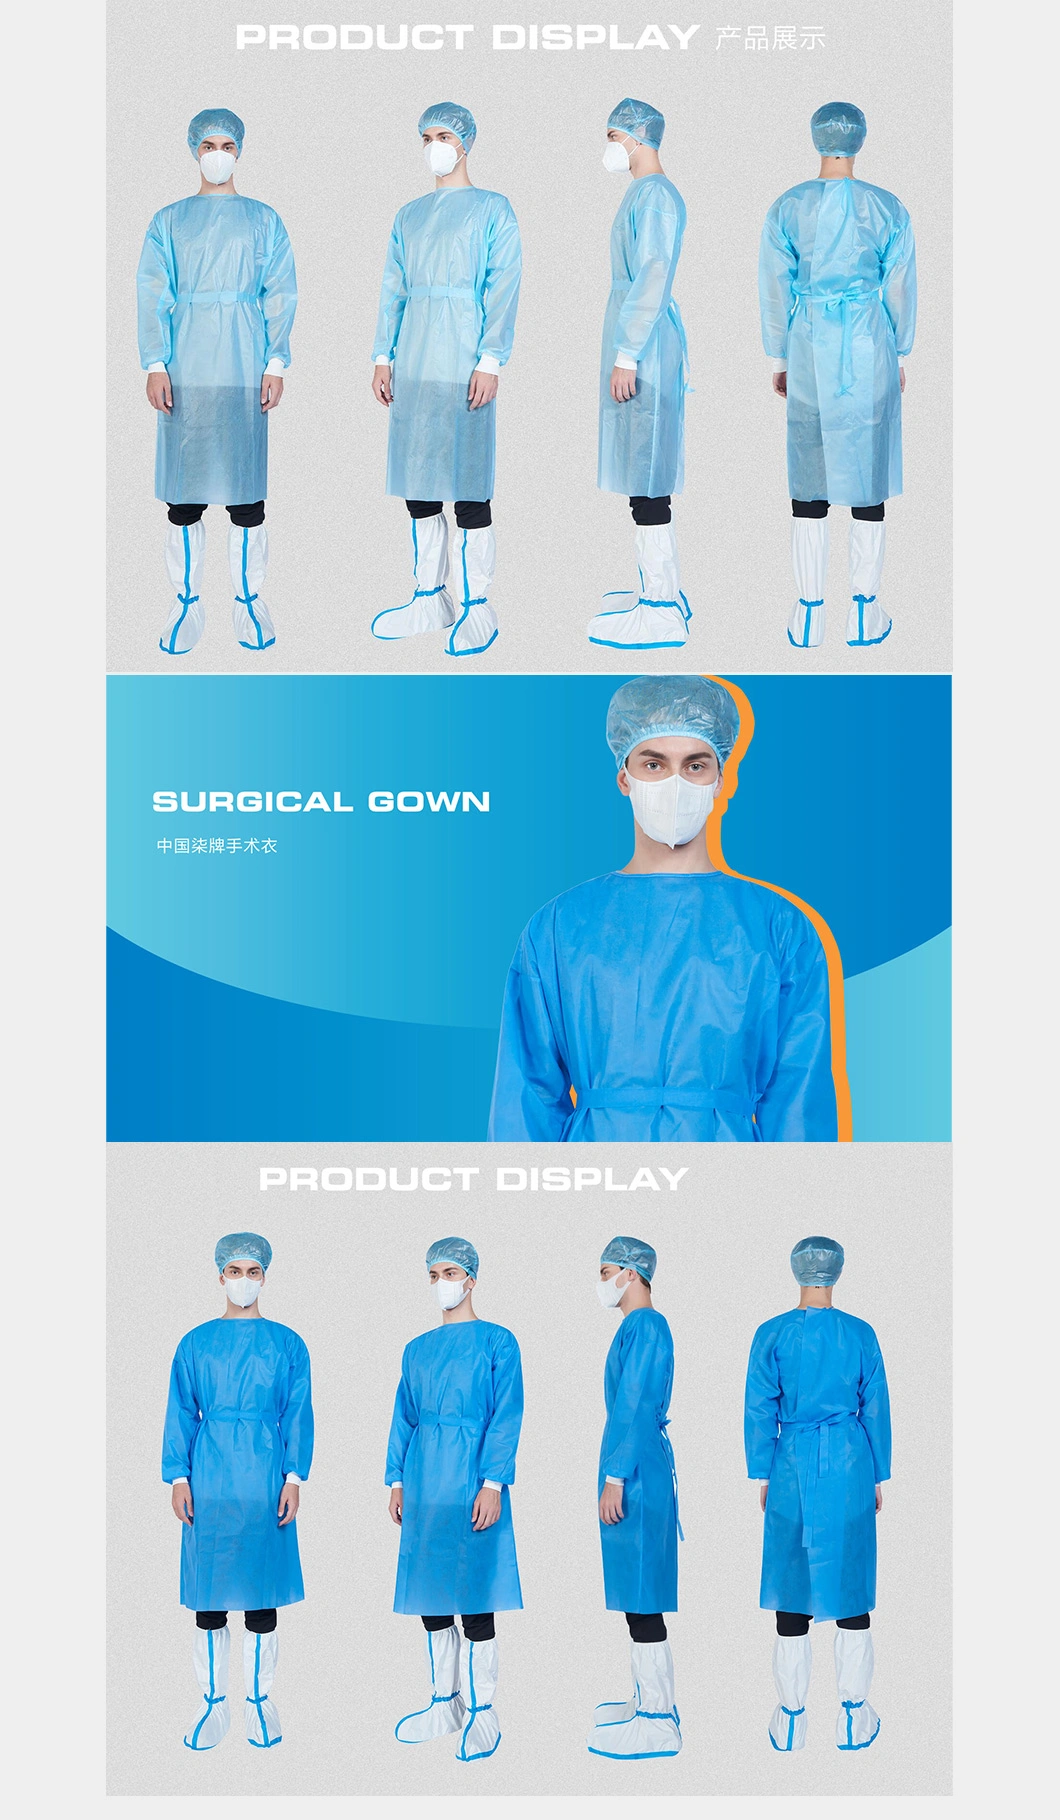 Seven Brand Cheap Hospital Using Disposable PP+PE Medical Shoe Cover